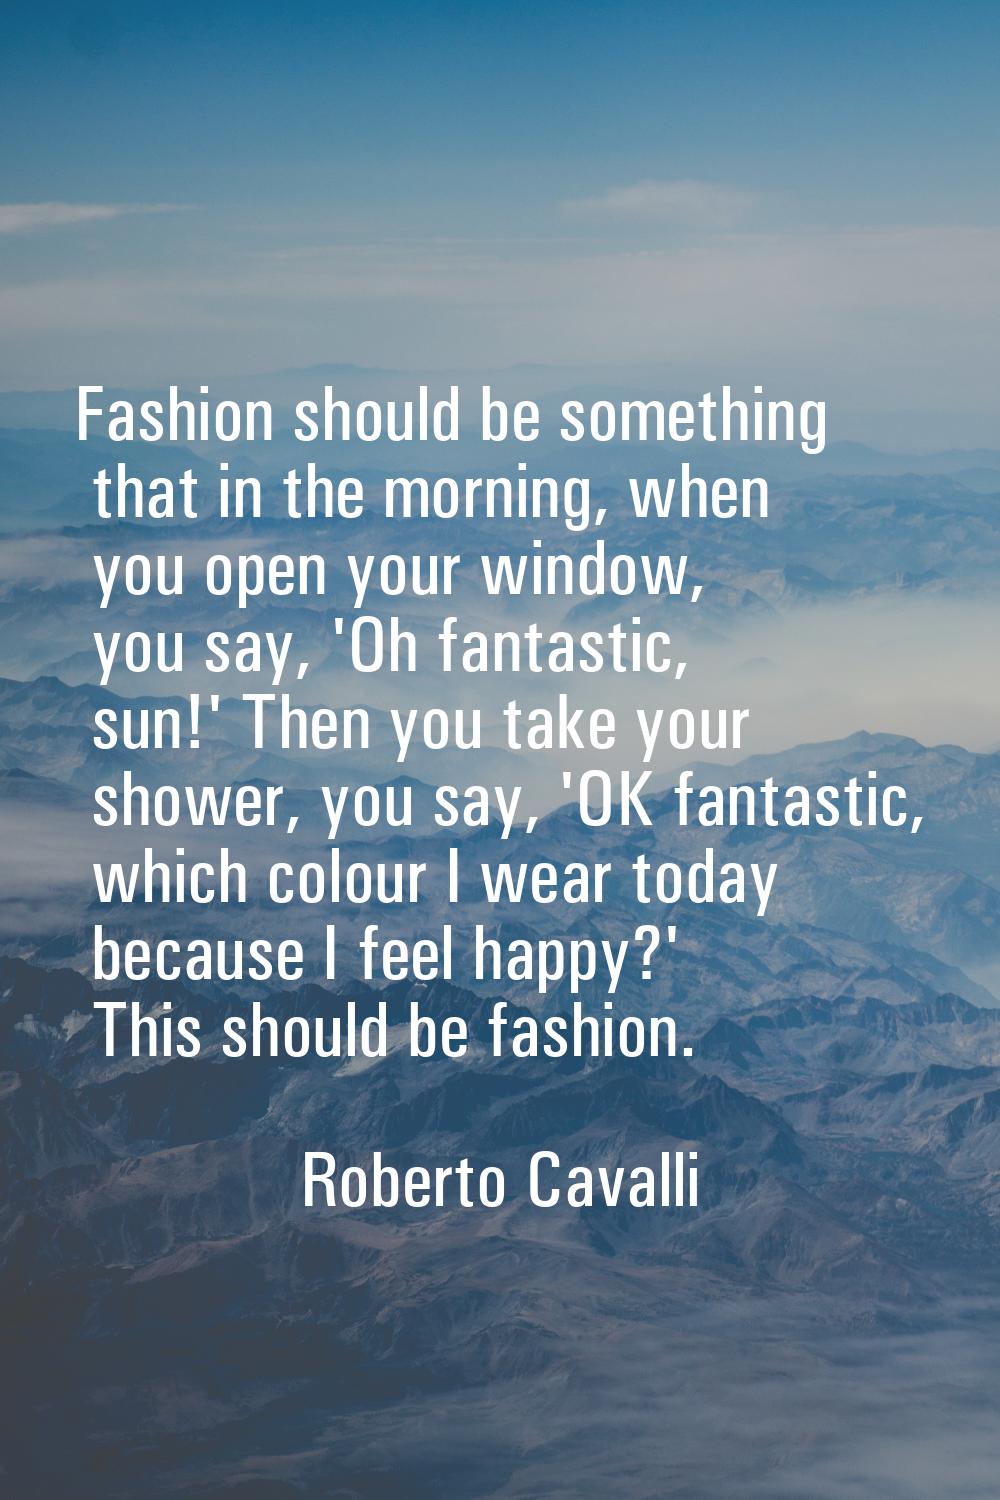 Fashion should be something that in the morning, when you open your window, you say, 'Oh fantastic,